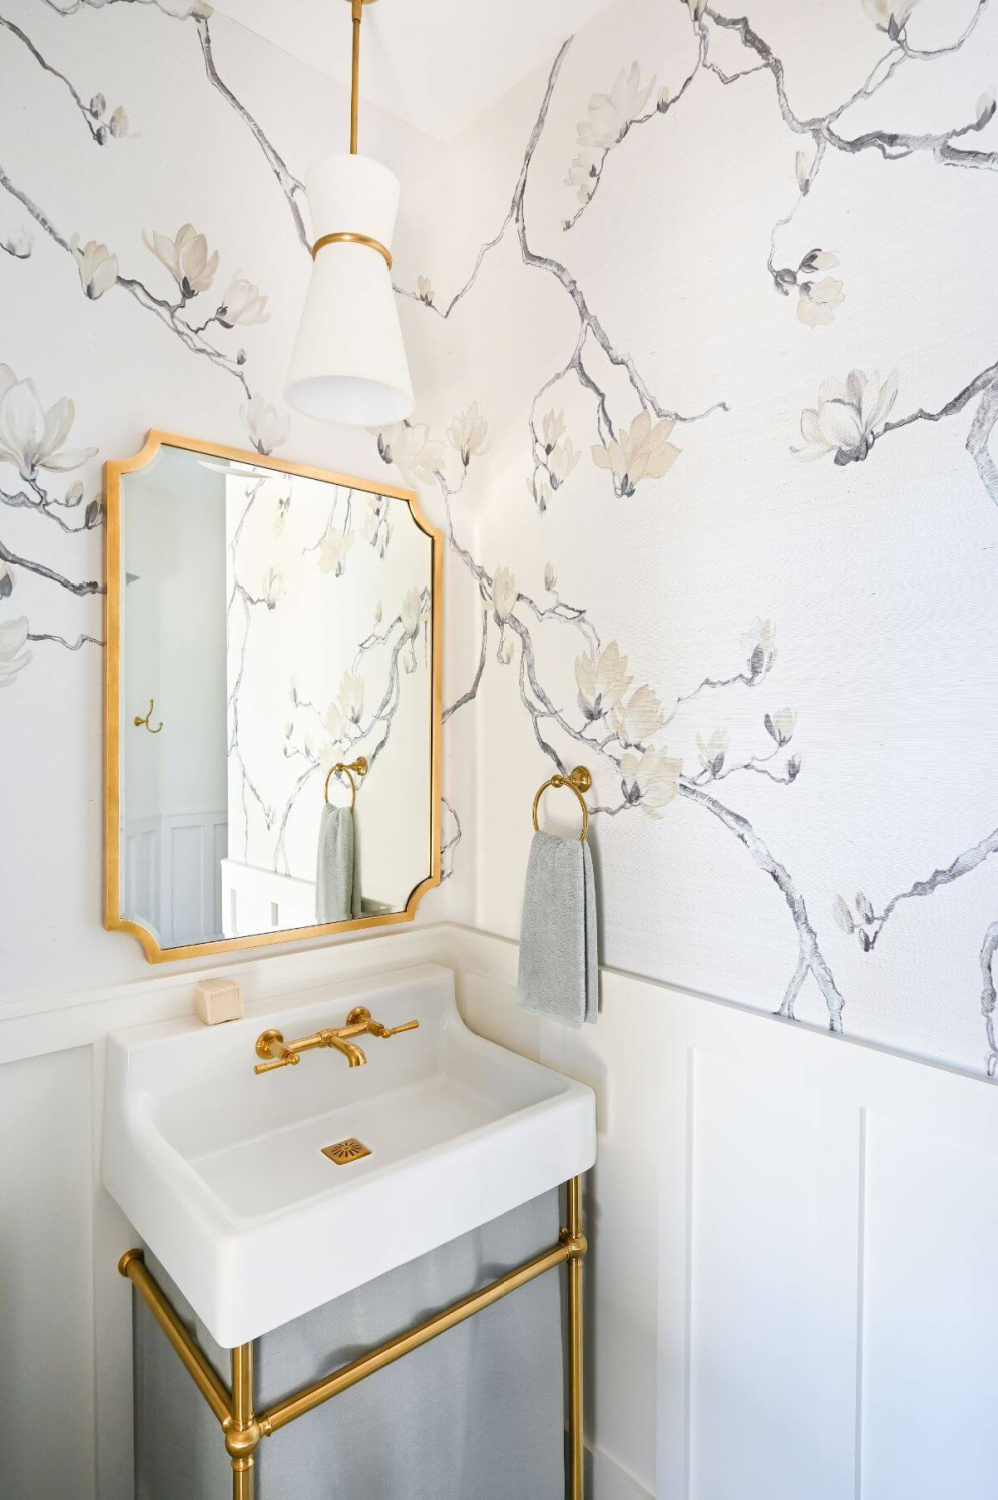 Beautiful modern French bathroom with grey branch wallpaper and console sink - Morningstar Builders. #frenchbathroom #modernfrenchbath #wallpaperedbathroom